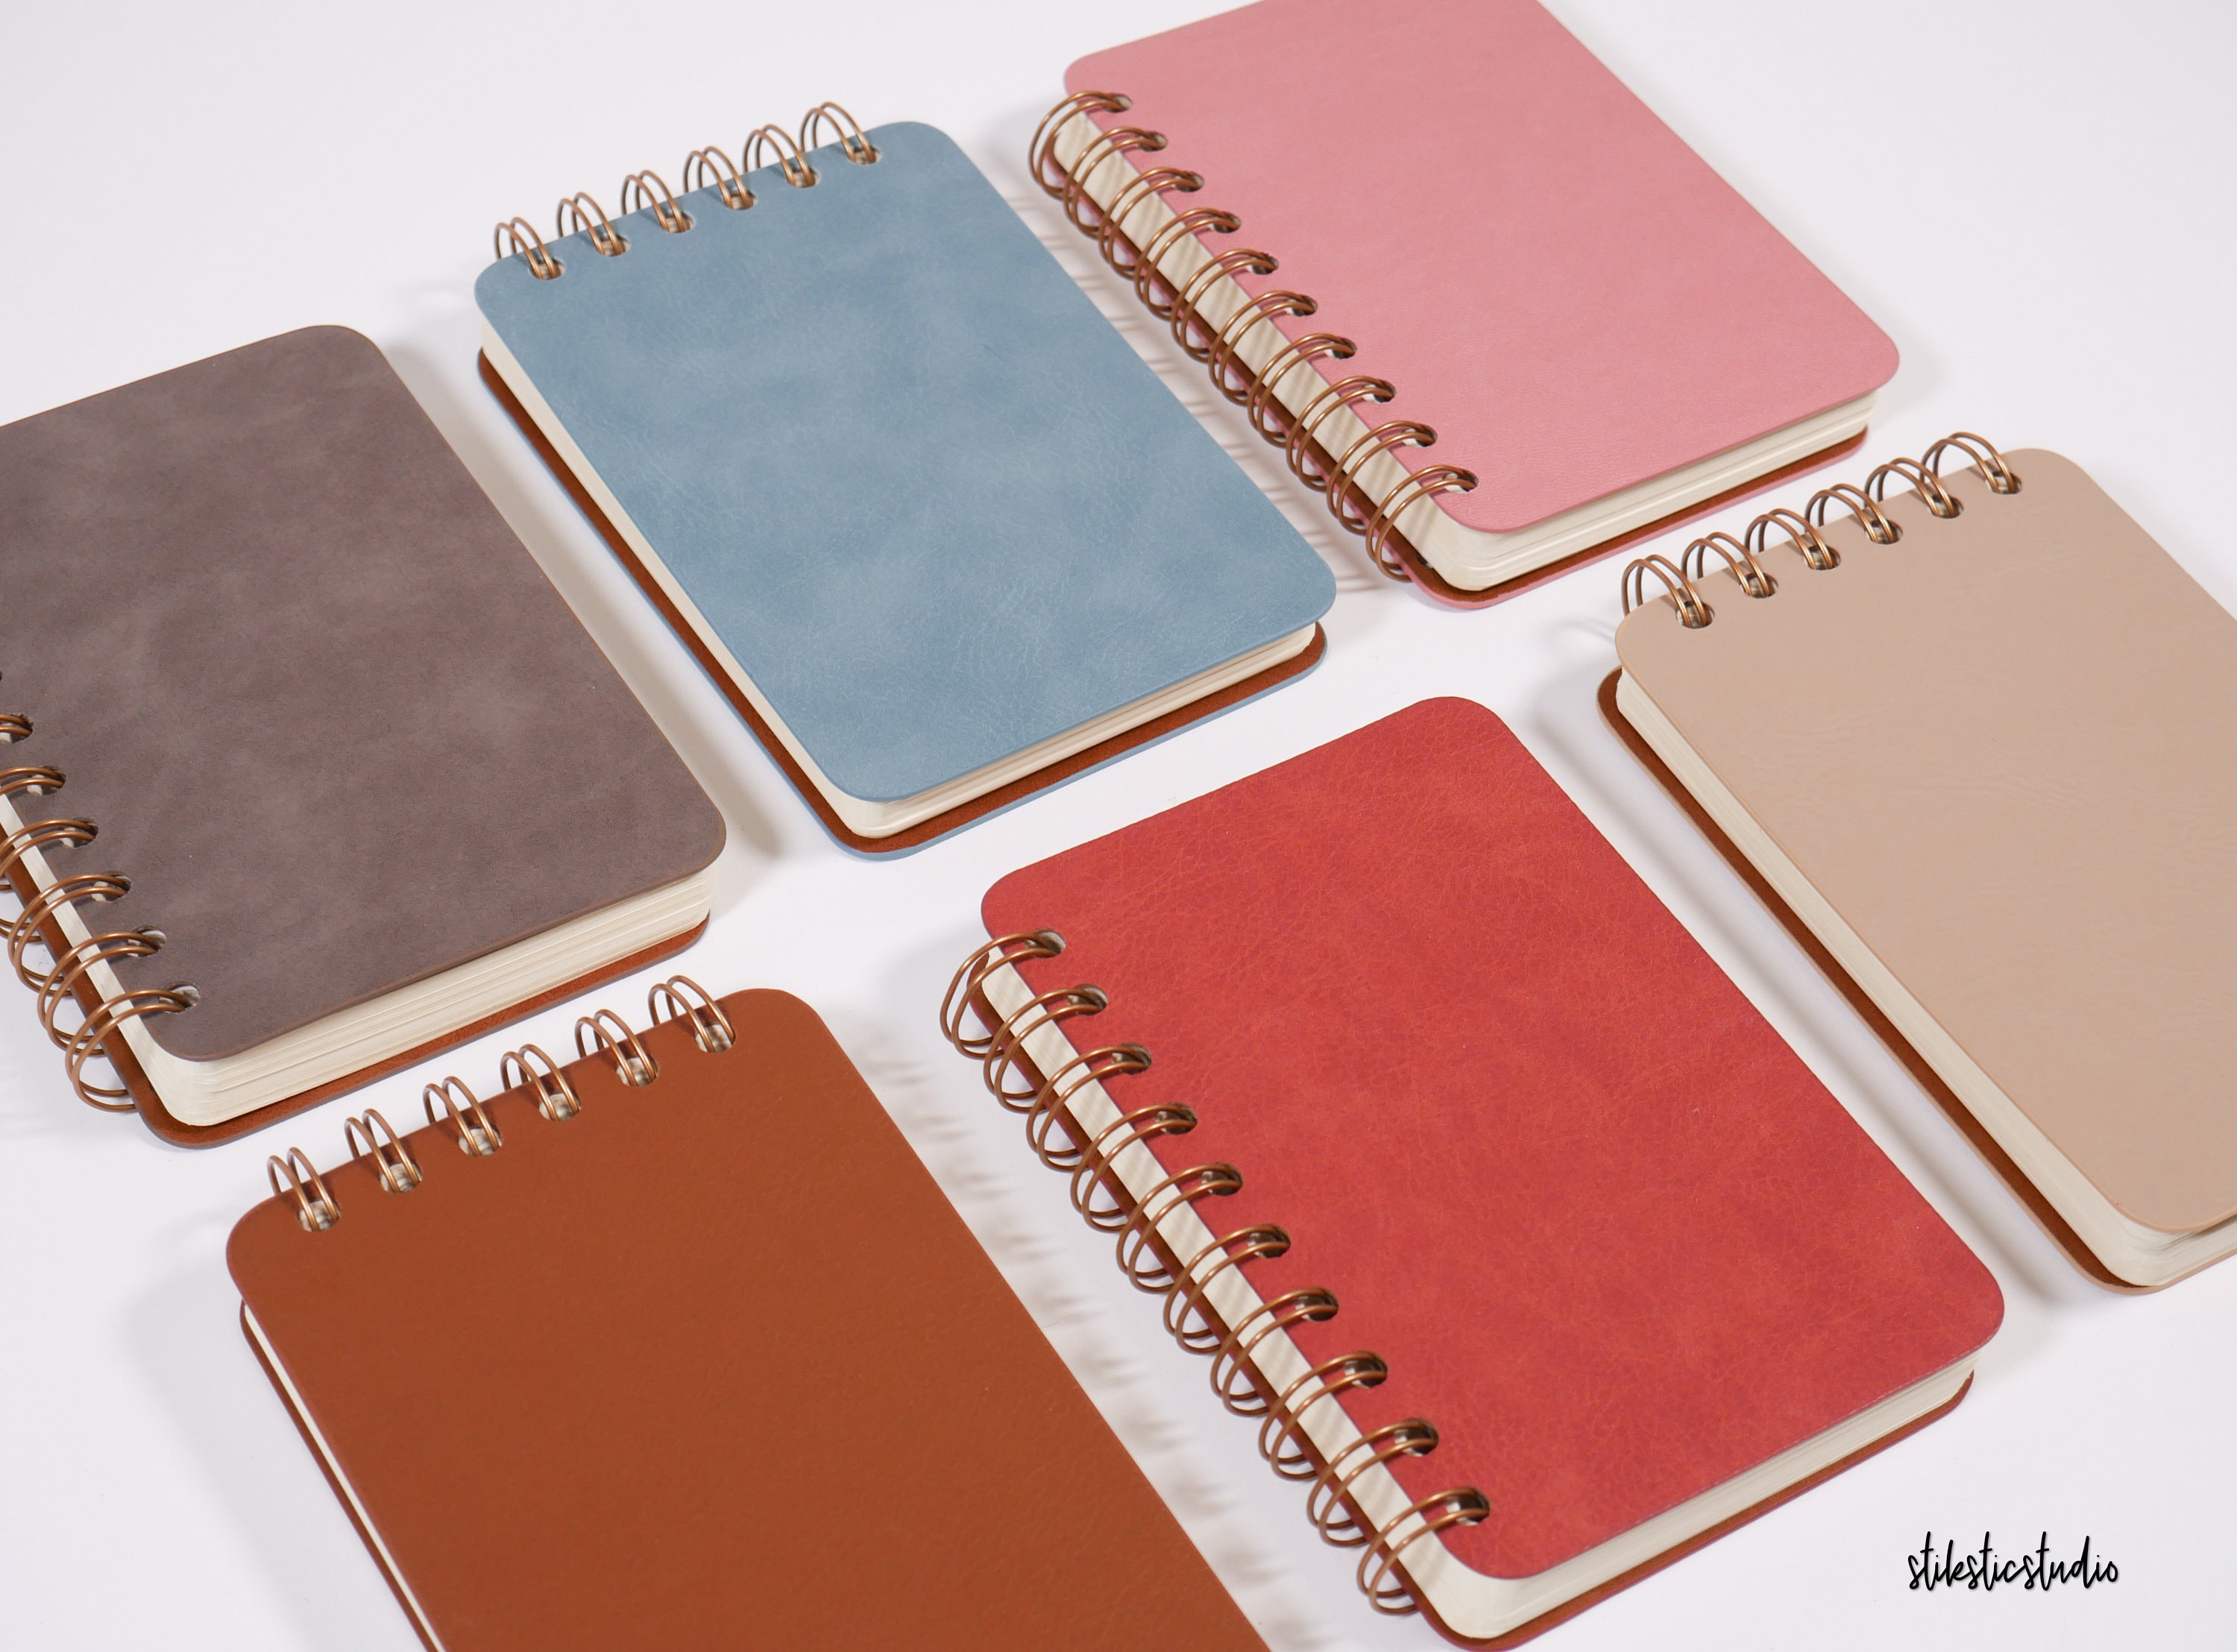 Portable Leather Sketchbook With Cute Design And 300g Cotton